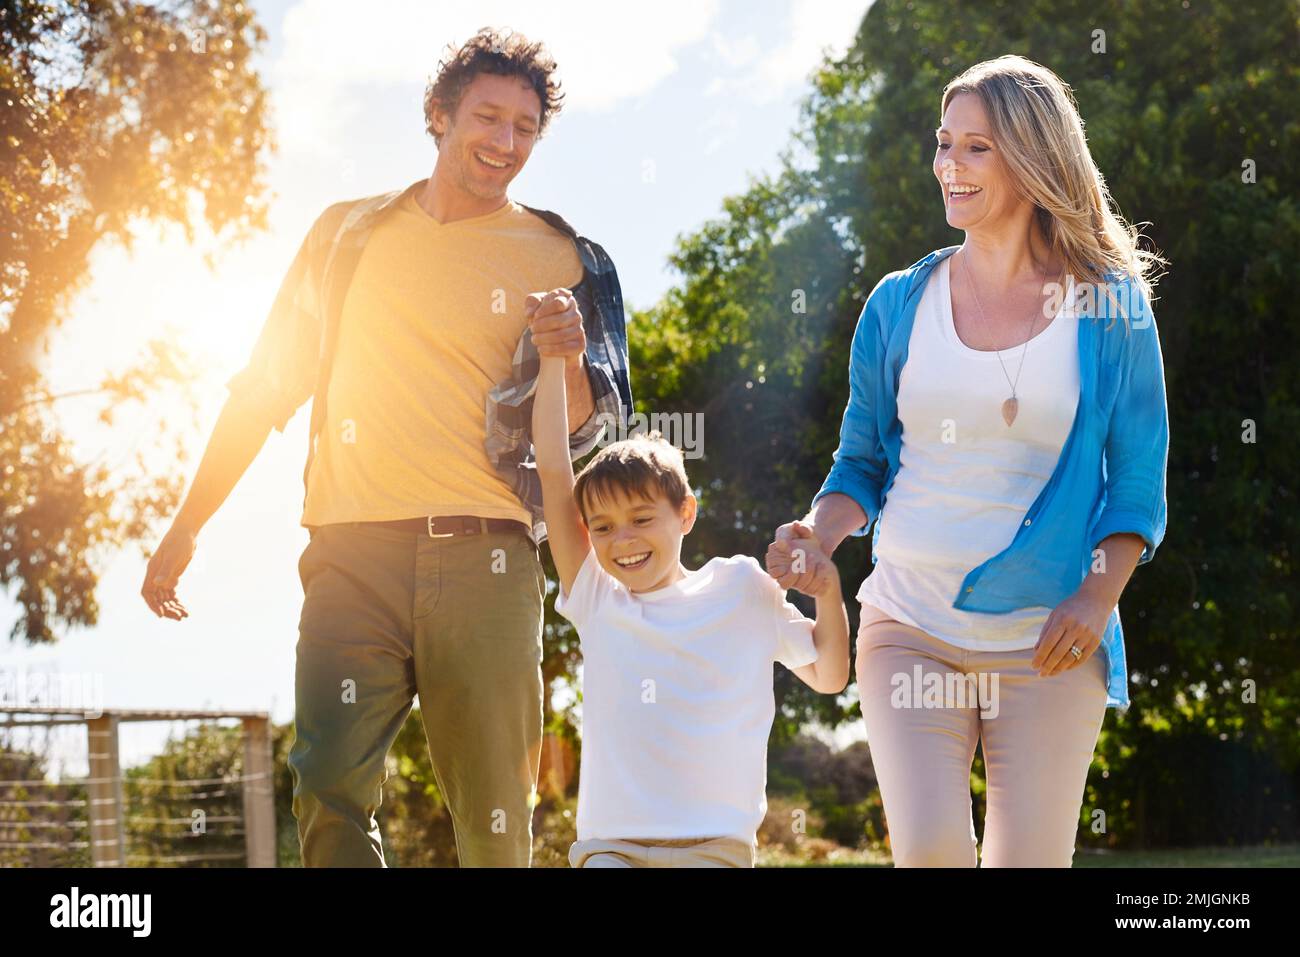 Seeing them happy is all they ever want. a happy family spending time together outdoors. Stock Photo